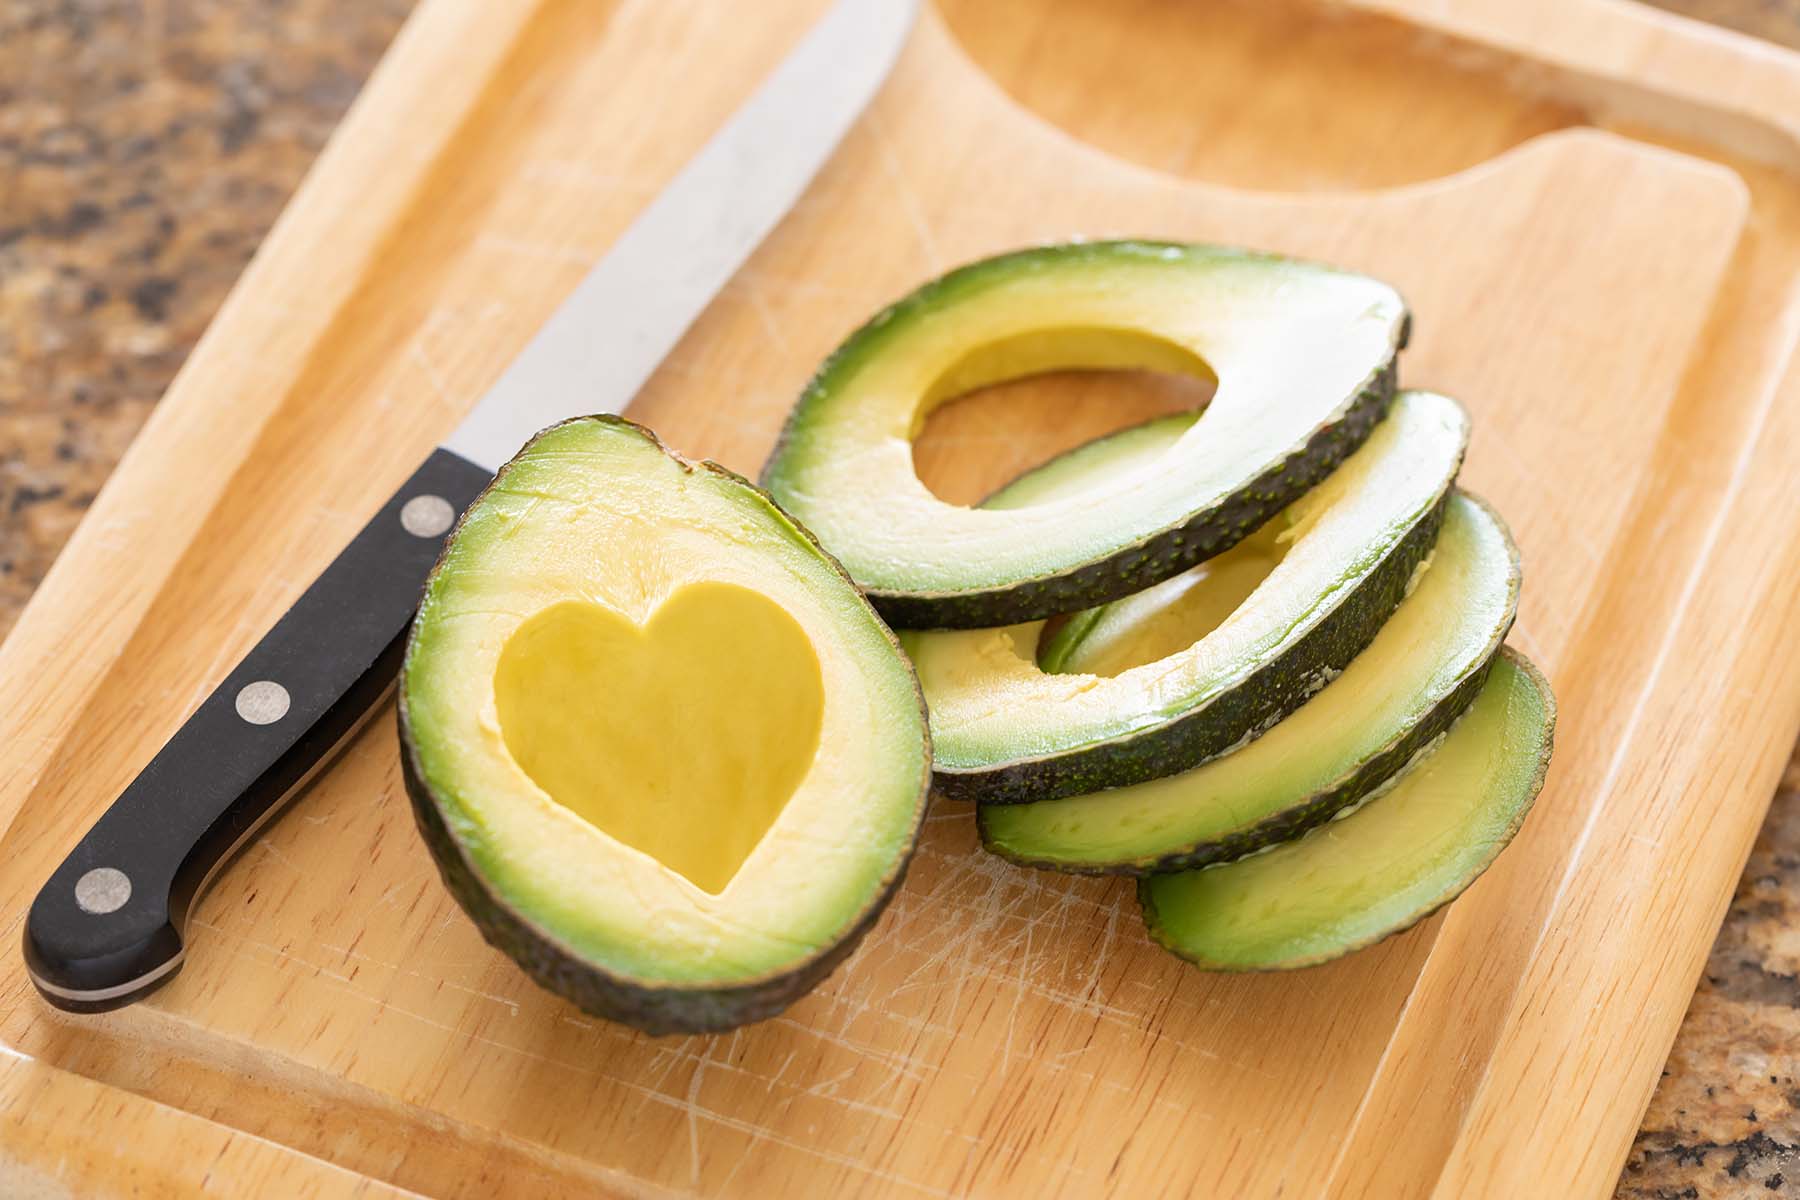 Avocado cut up on carving board. Half has a heart shape carved out to show avocado is good for heart health.